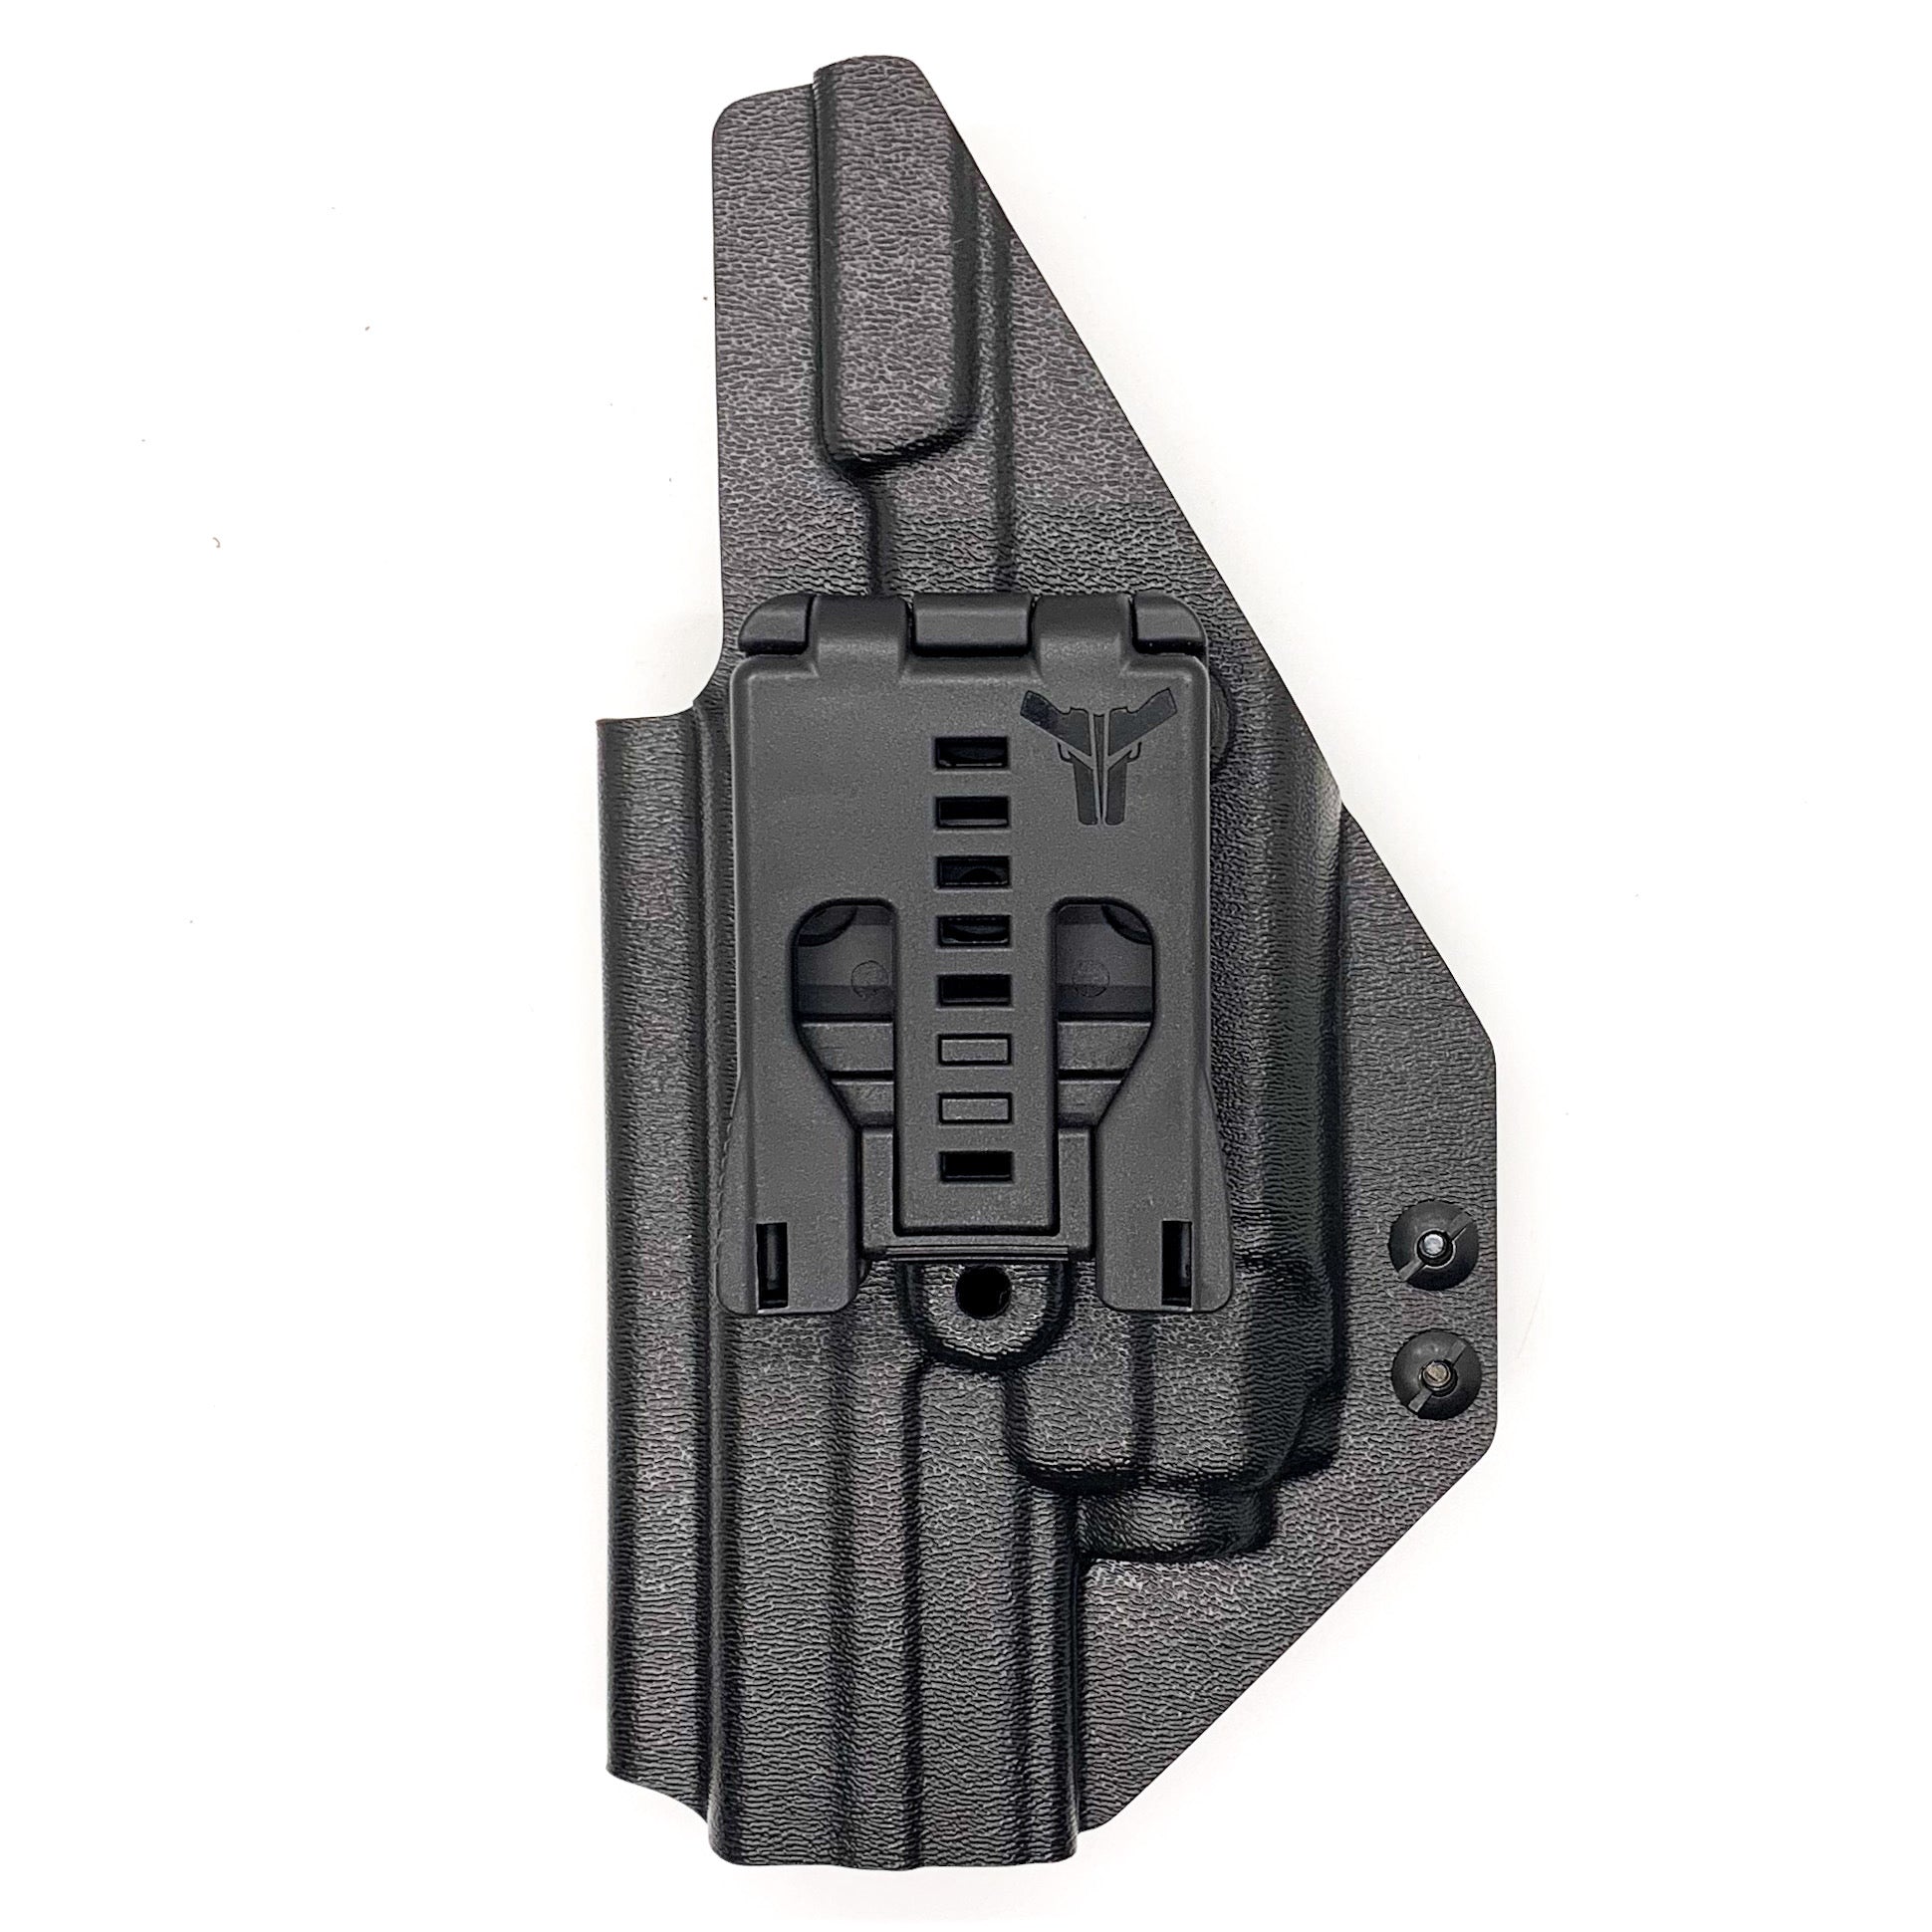 For the best Outside Waistband OWB Kydex Holster designed to fit the Smith & Wesson M&P M2.0 5" pistols with the Streamlight TLR-8 or 8A light mounted to the pistol shop Four Brothers Holsters. Full sweat guard, adjustable retention, smooth edges to reduce printing. Cleared for red dot sights. Proudly made in the USA. 